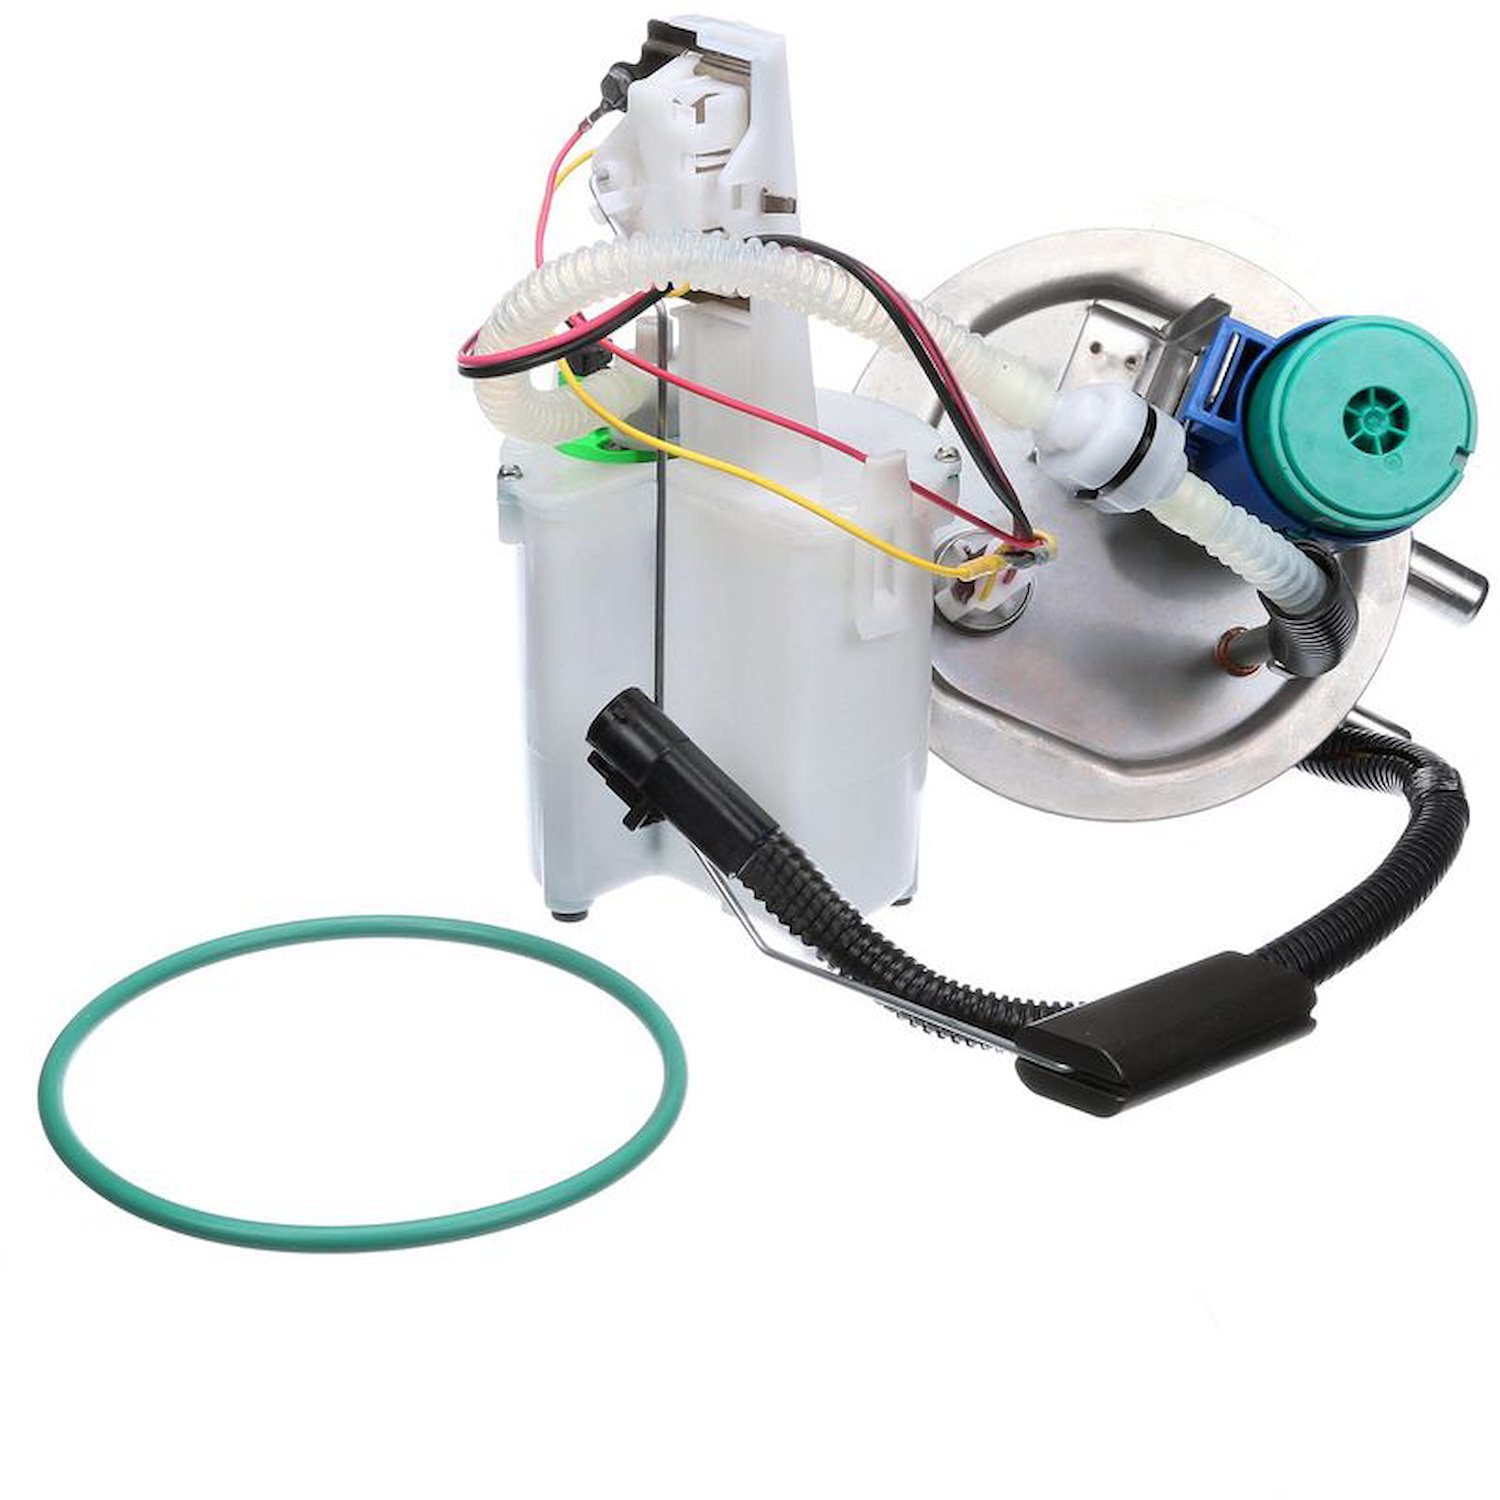 OE Ford Replacement Electric Fuel Pump Module Assembly for 2005-2007 Ford F-250 Super Duty